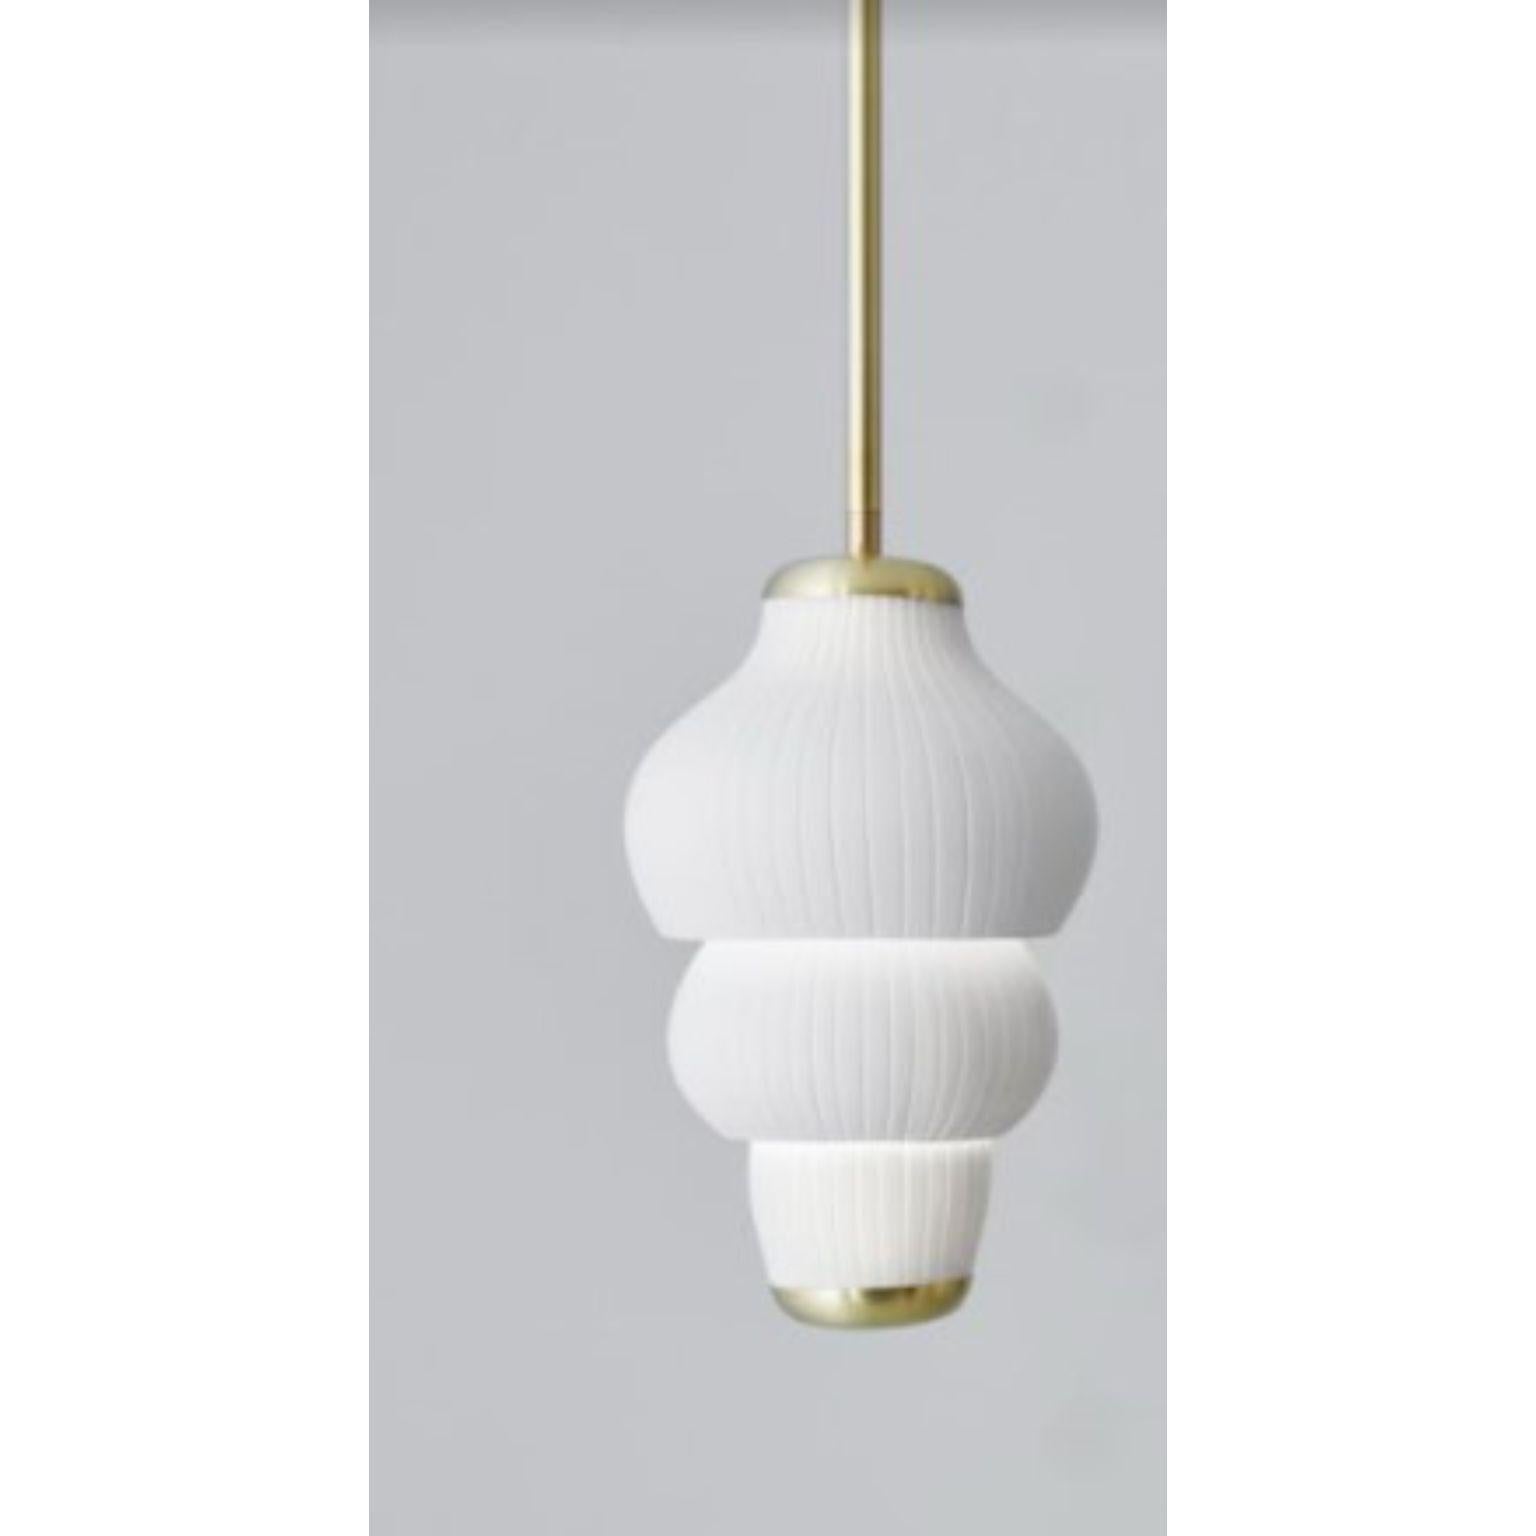 Glaïeul small pendant light by Mydriaz
Dimensions: D 26 x H 100 cm 
Materials: Brushed brass, pale gold finish, biscuit ceramic.
Adjustable measure.

All our lamps can be wired according to each country. If sold to the USA it will be wired for